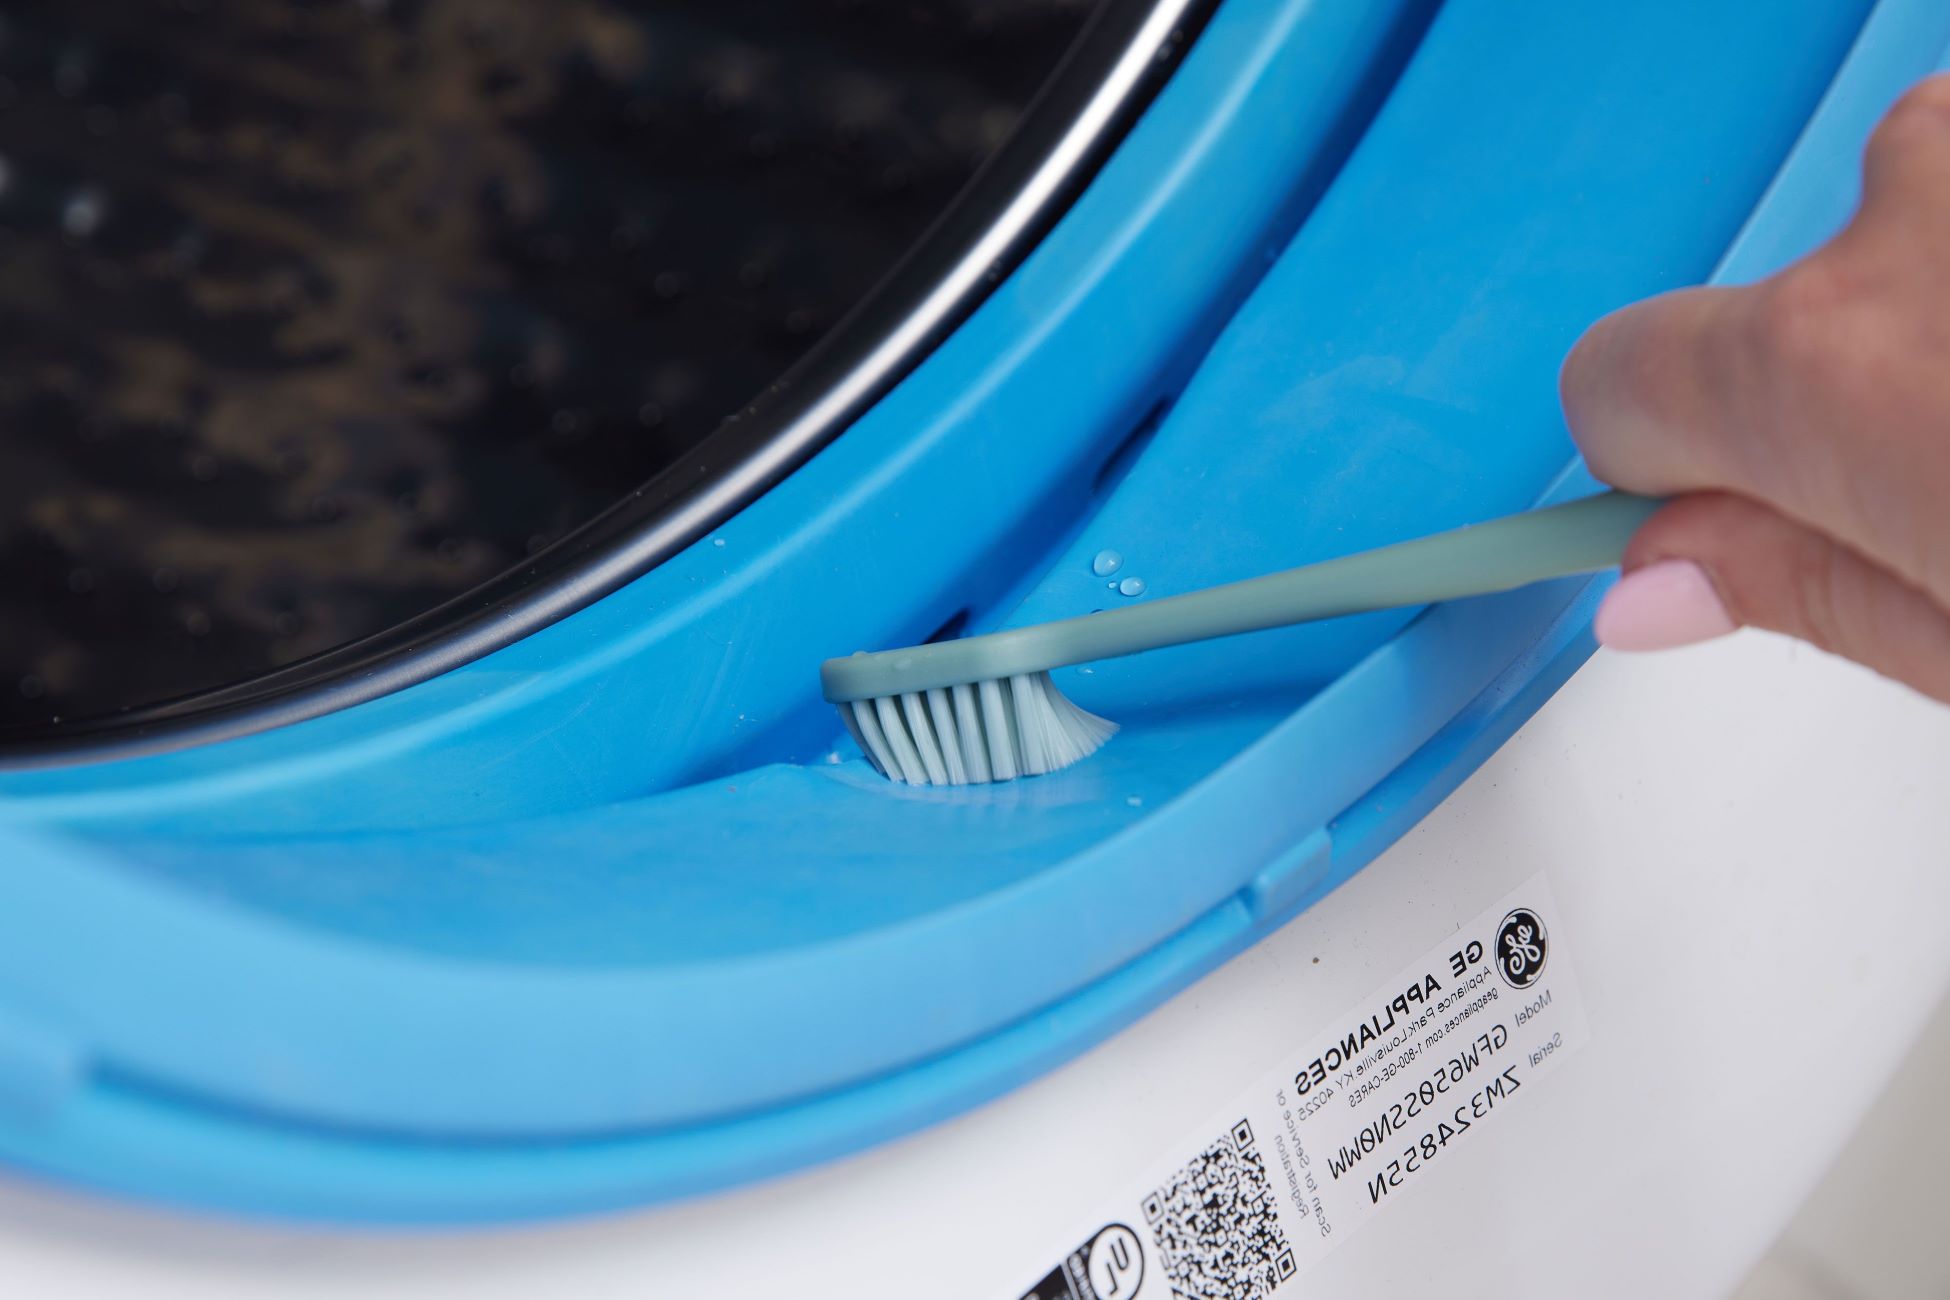 How To Clean A Portable Washing Machine